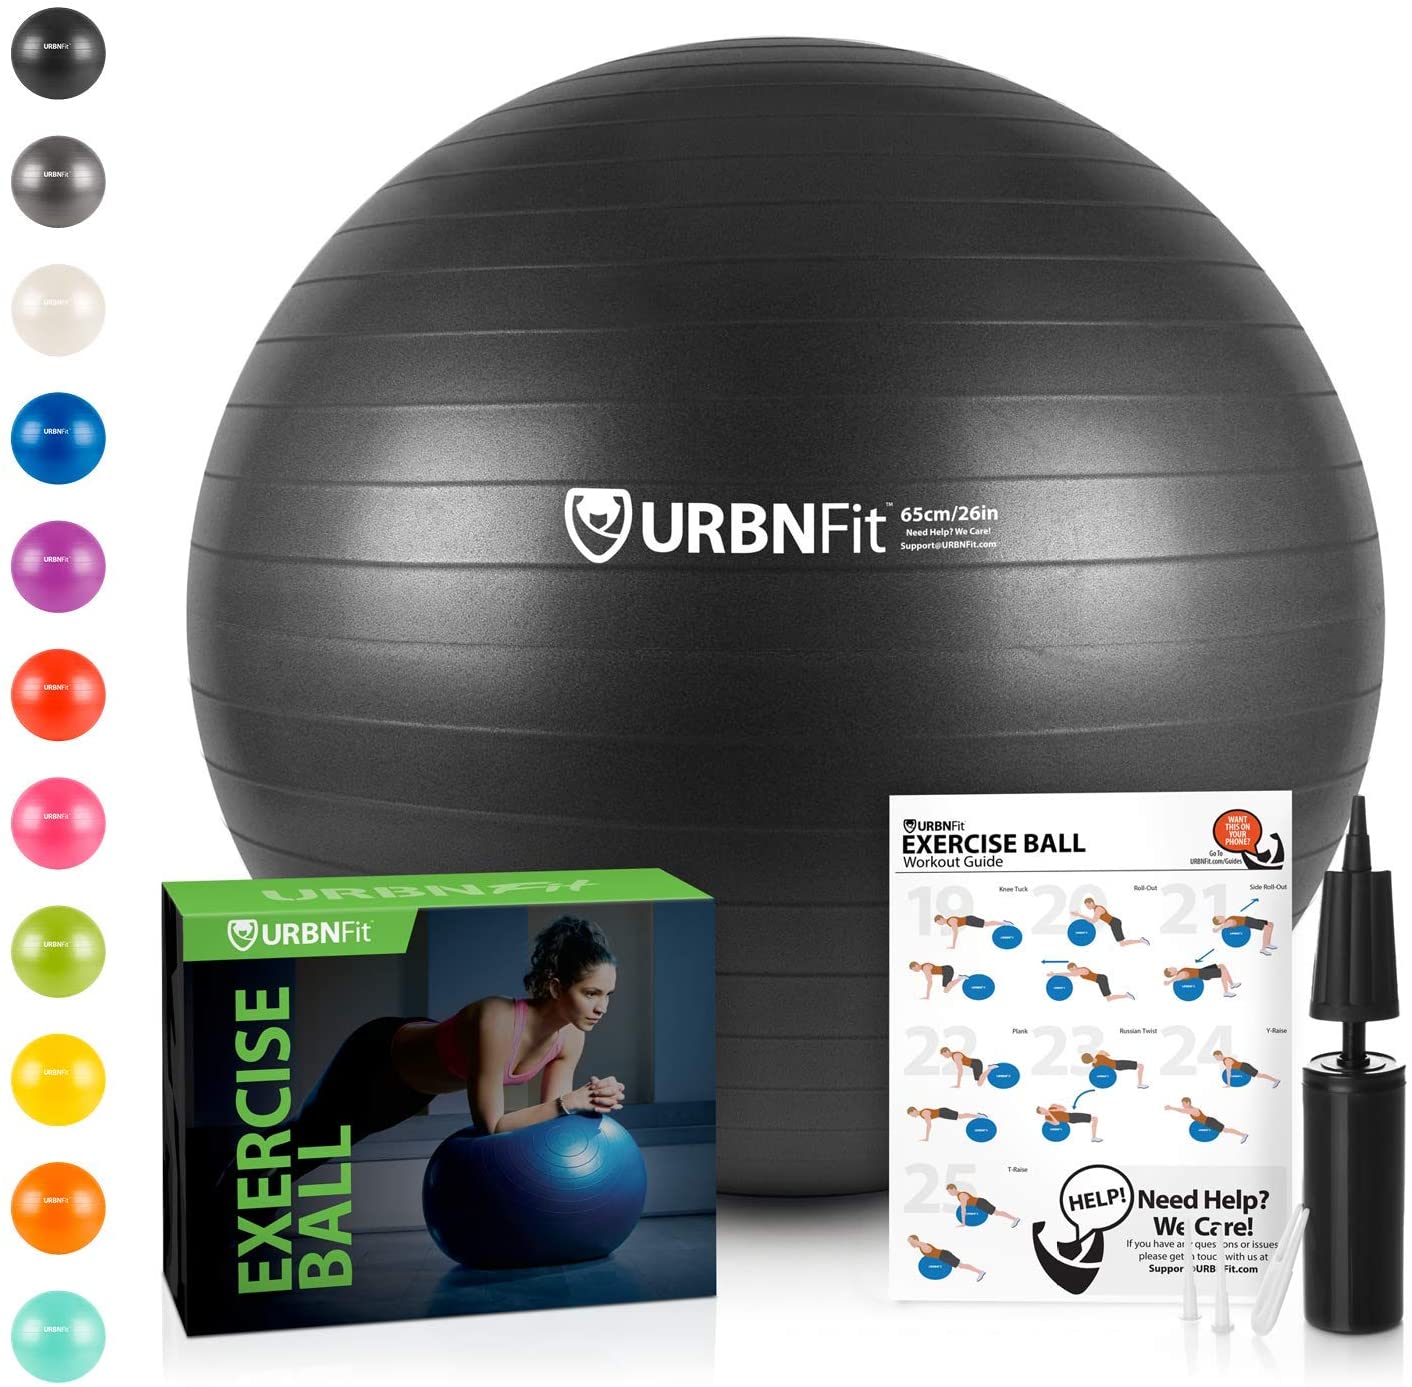 The Best Exercise Balls To Buy In Up Your Workout